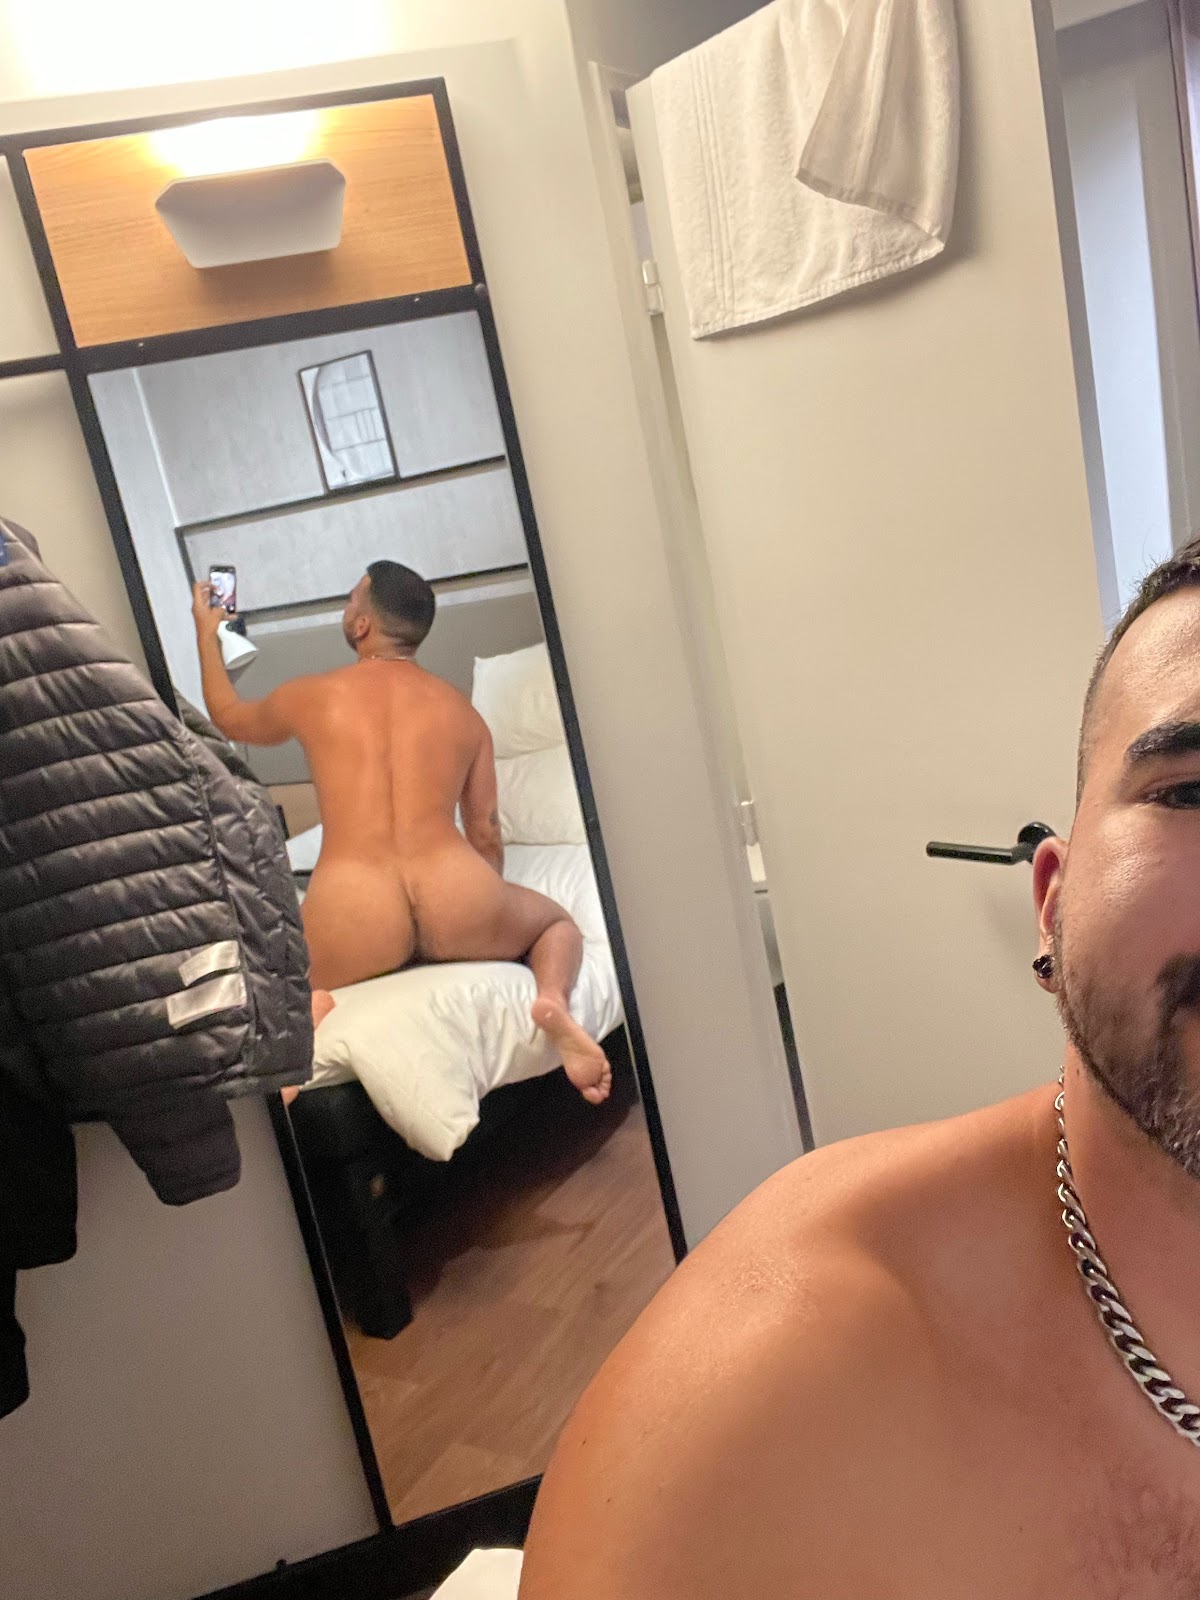 gay travel slut and gay xxx porn creator Phil takes naked hookup photo in mirror of paris hotel room